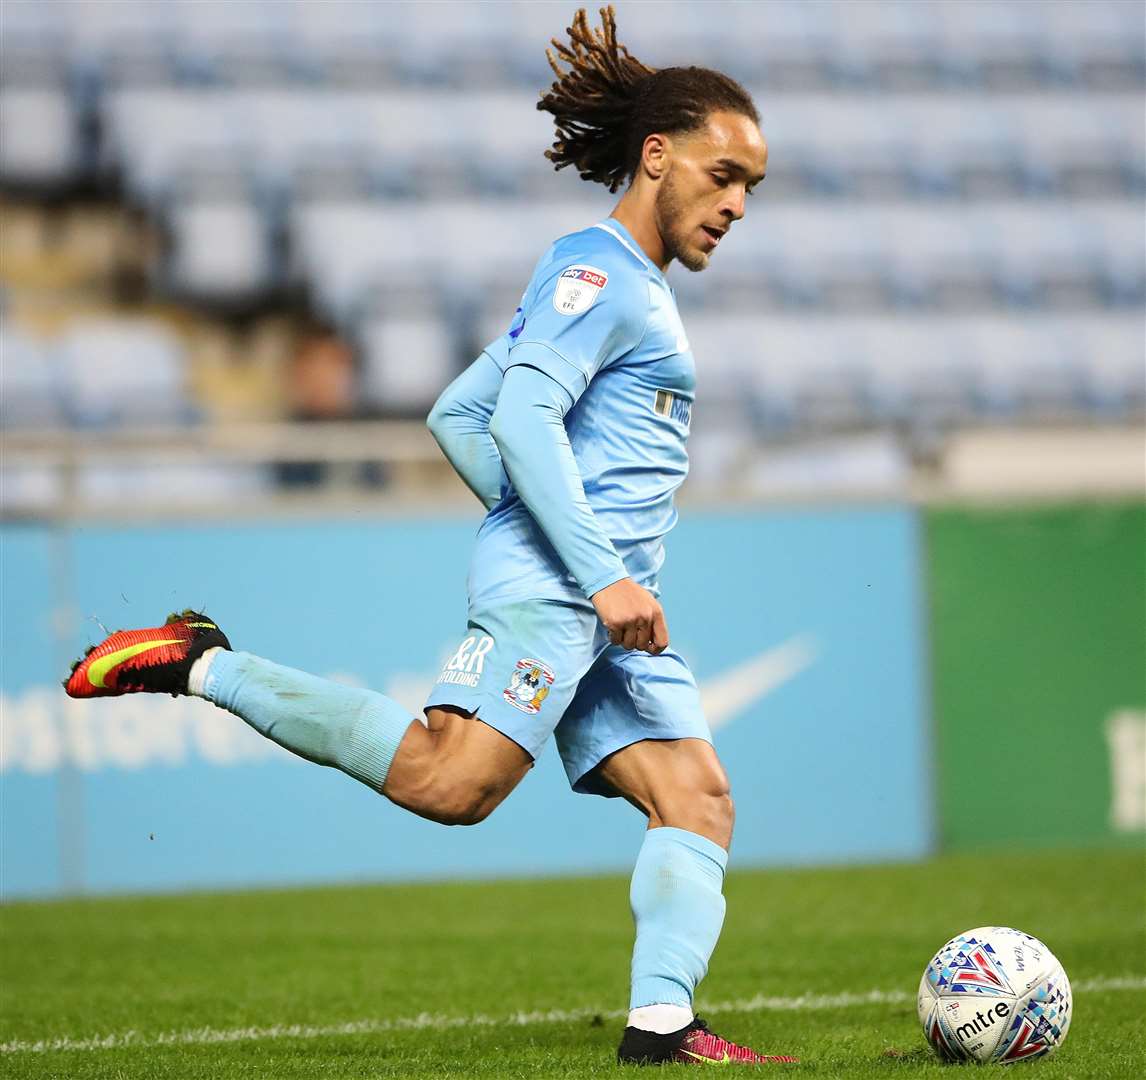 Ebbsfleet's loan signing Reise Allassani in action for Coventry City